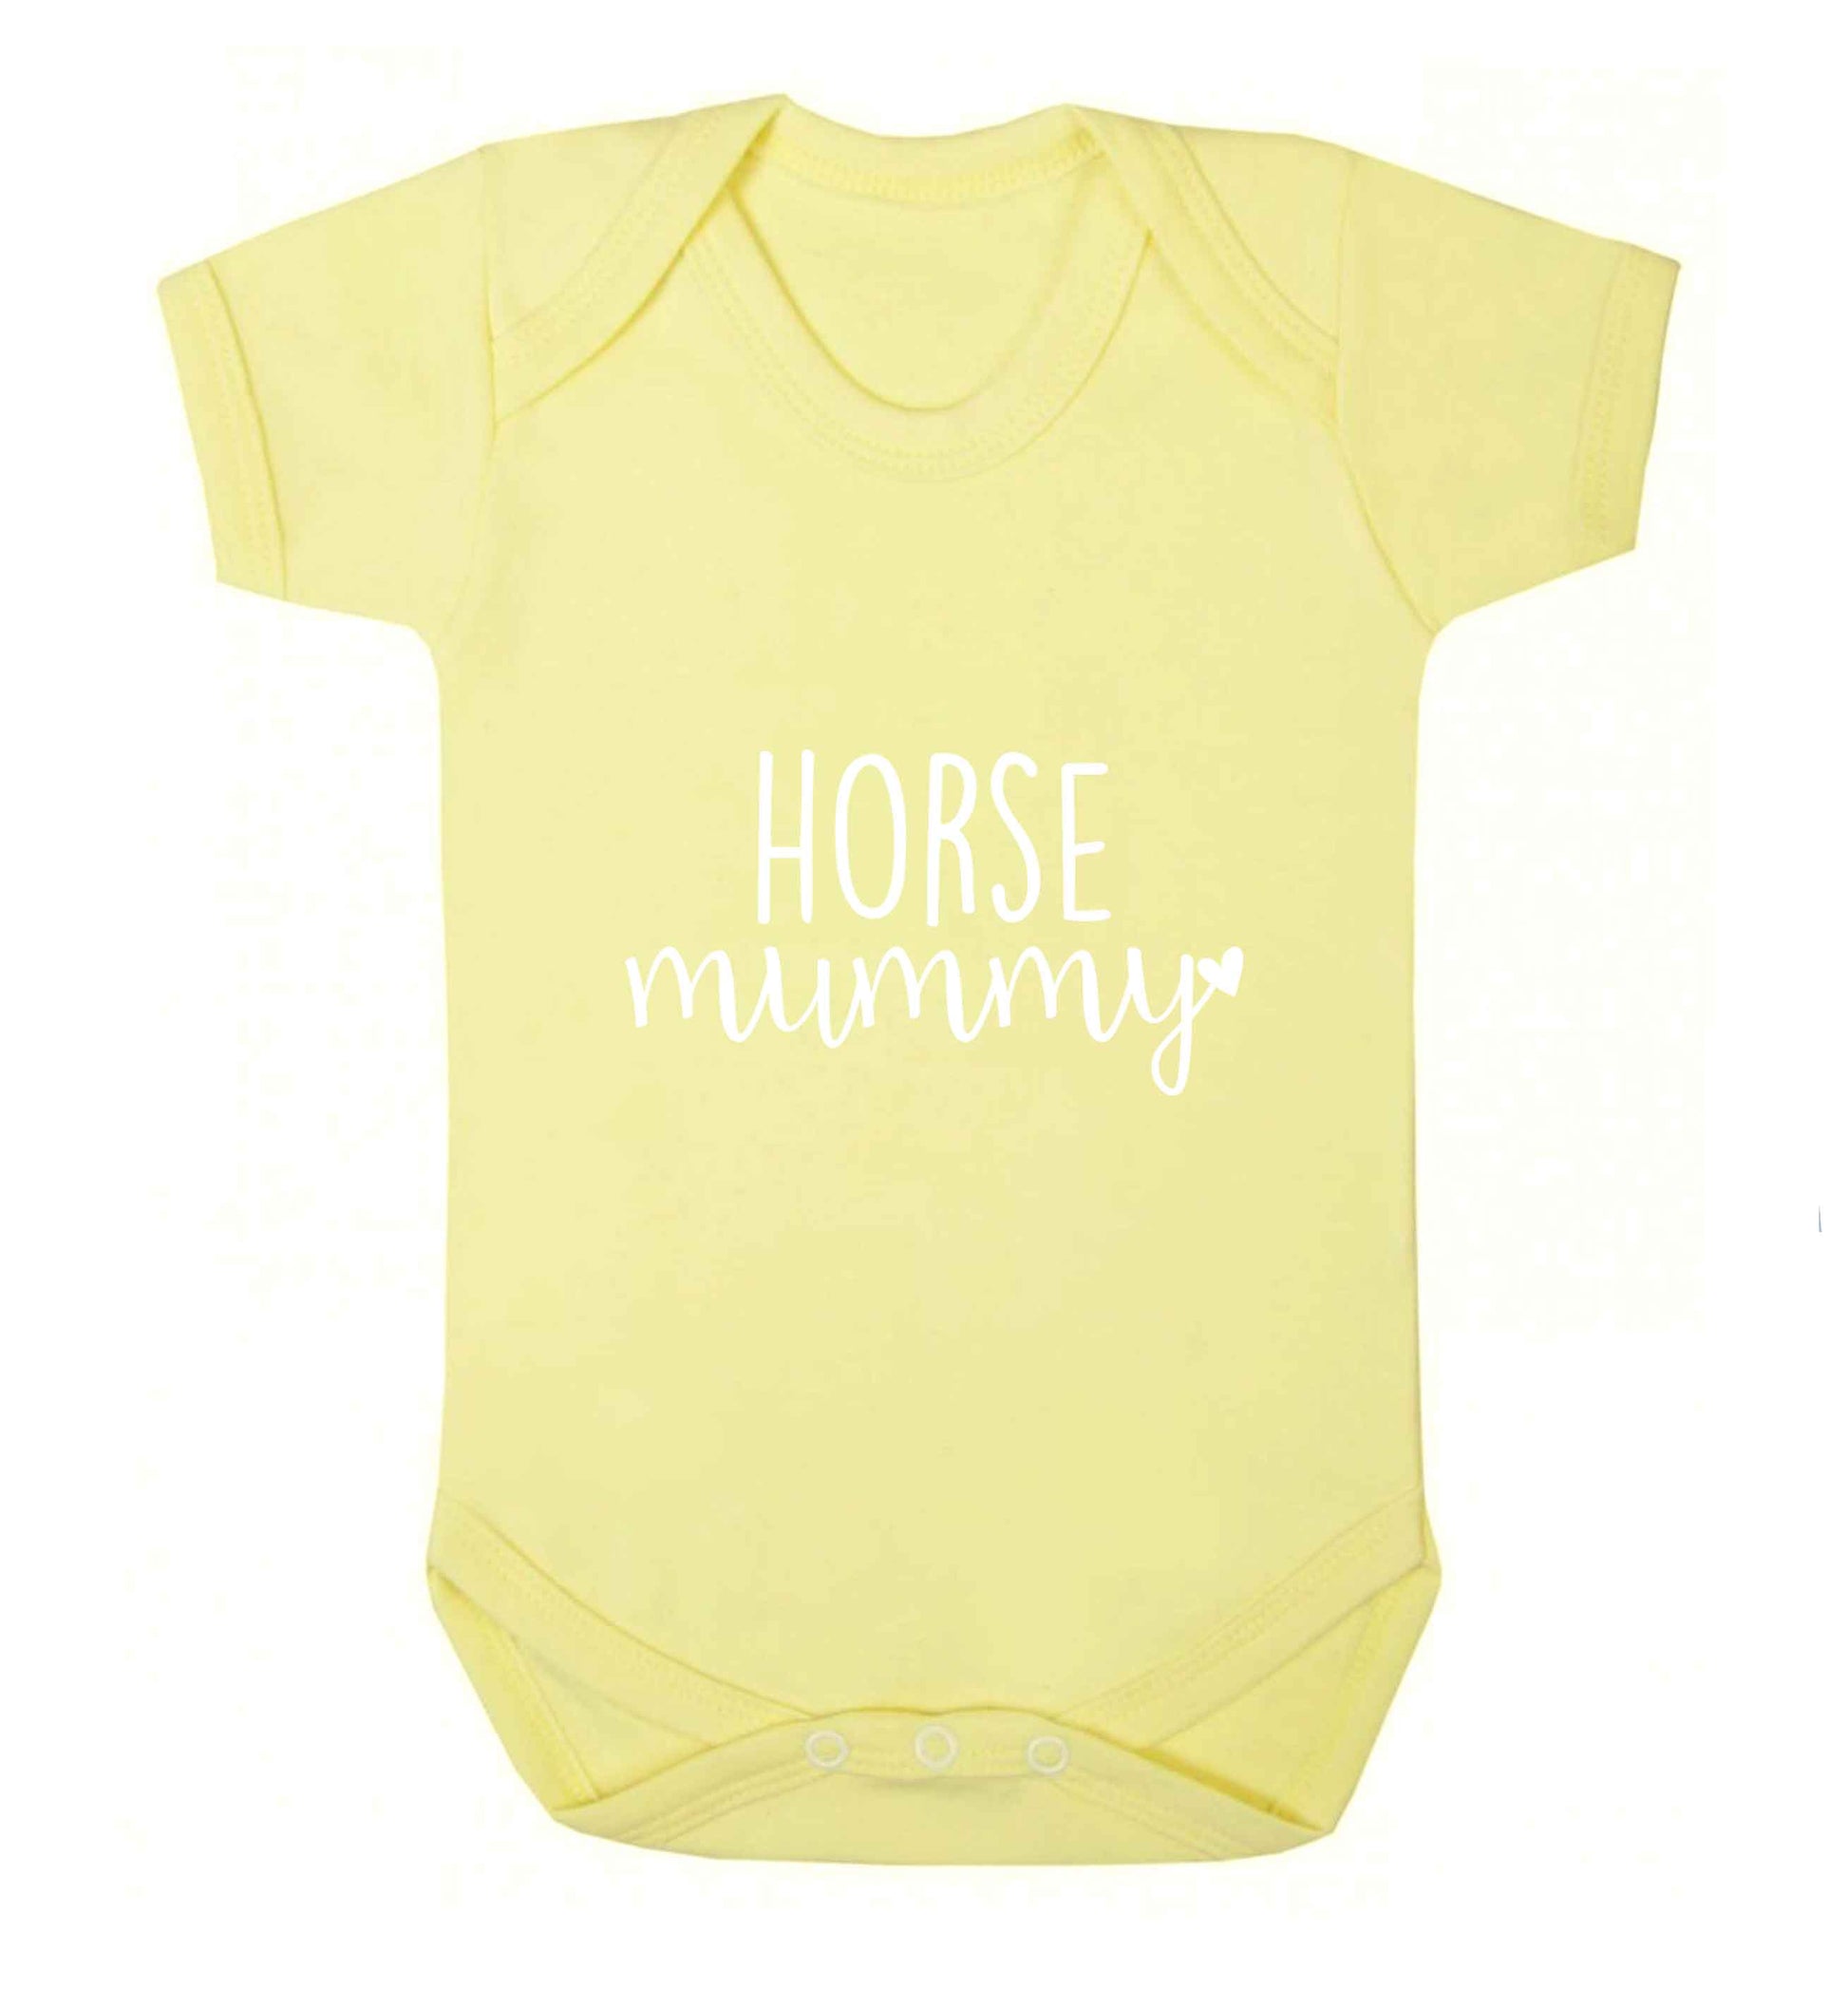 Horse mummy baby vest pale yellow 18-24 months